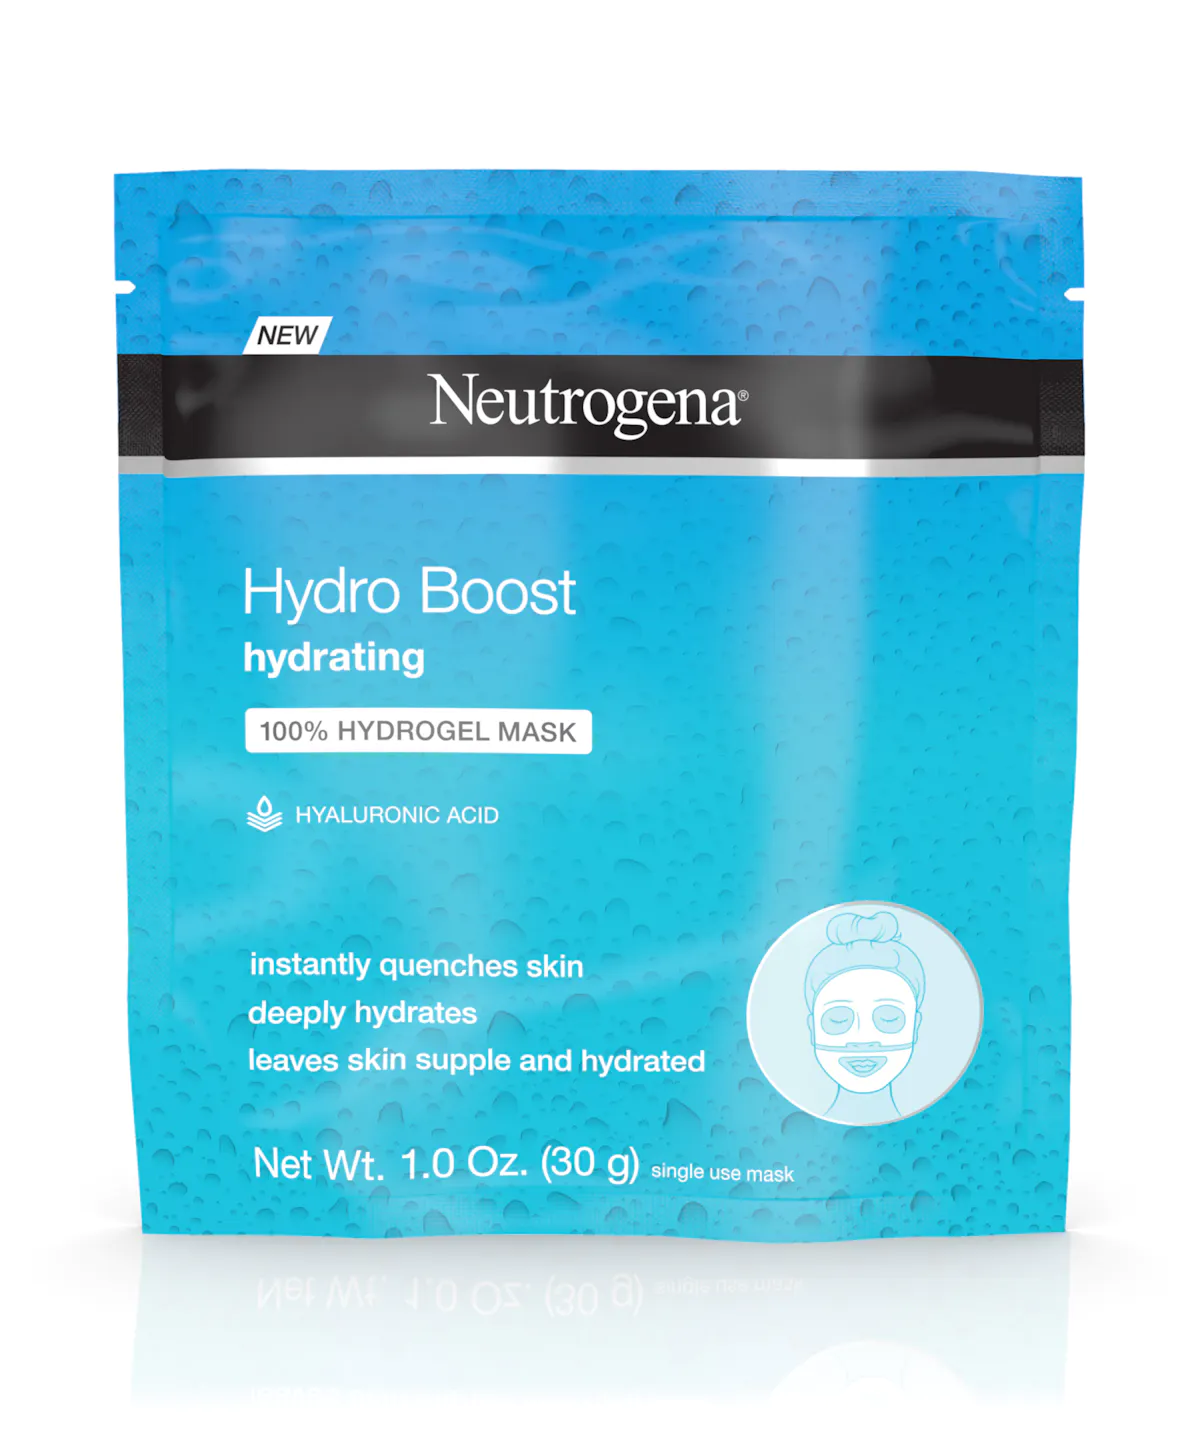 :Neutrogena Hydro Boost Moisturizing & Hydrating 100% Hydrogel Sheet Face Mask for Dry Skin with Hyaluronic Acid, Gentle & Non-Comedogenic, 1 Ounce (Pack of 12),SG_B076H45H68_US